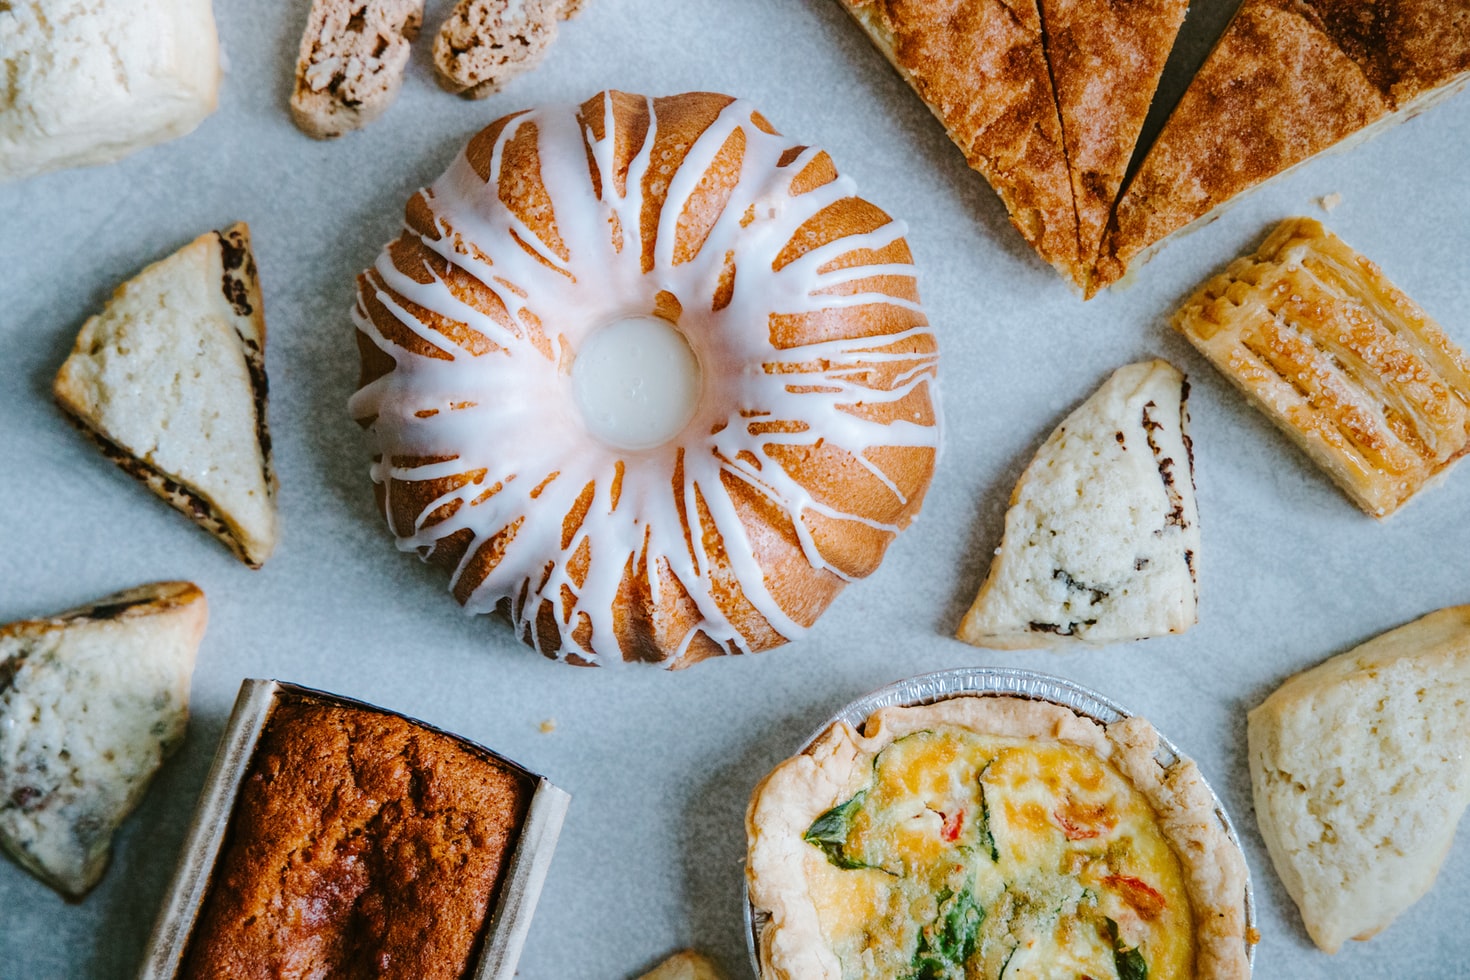 Bakery and Commercial Kitchen | Food and Beverage Consultant